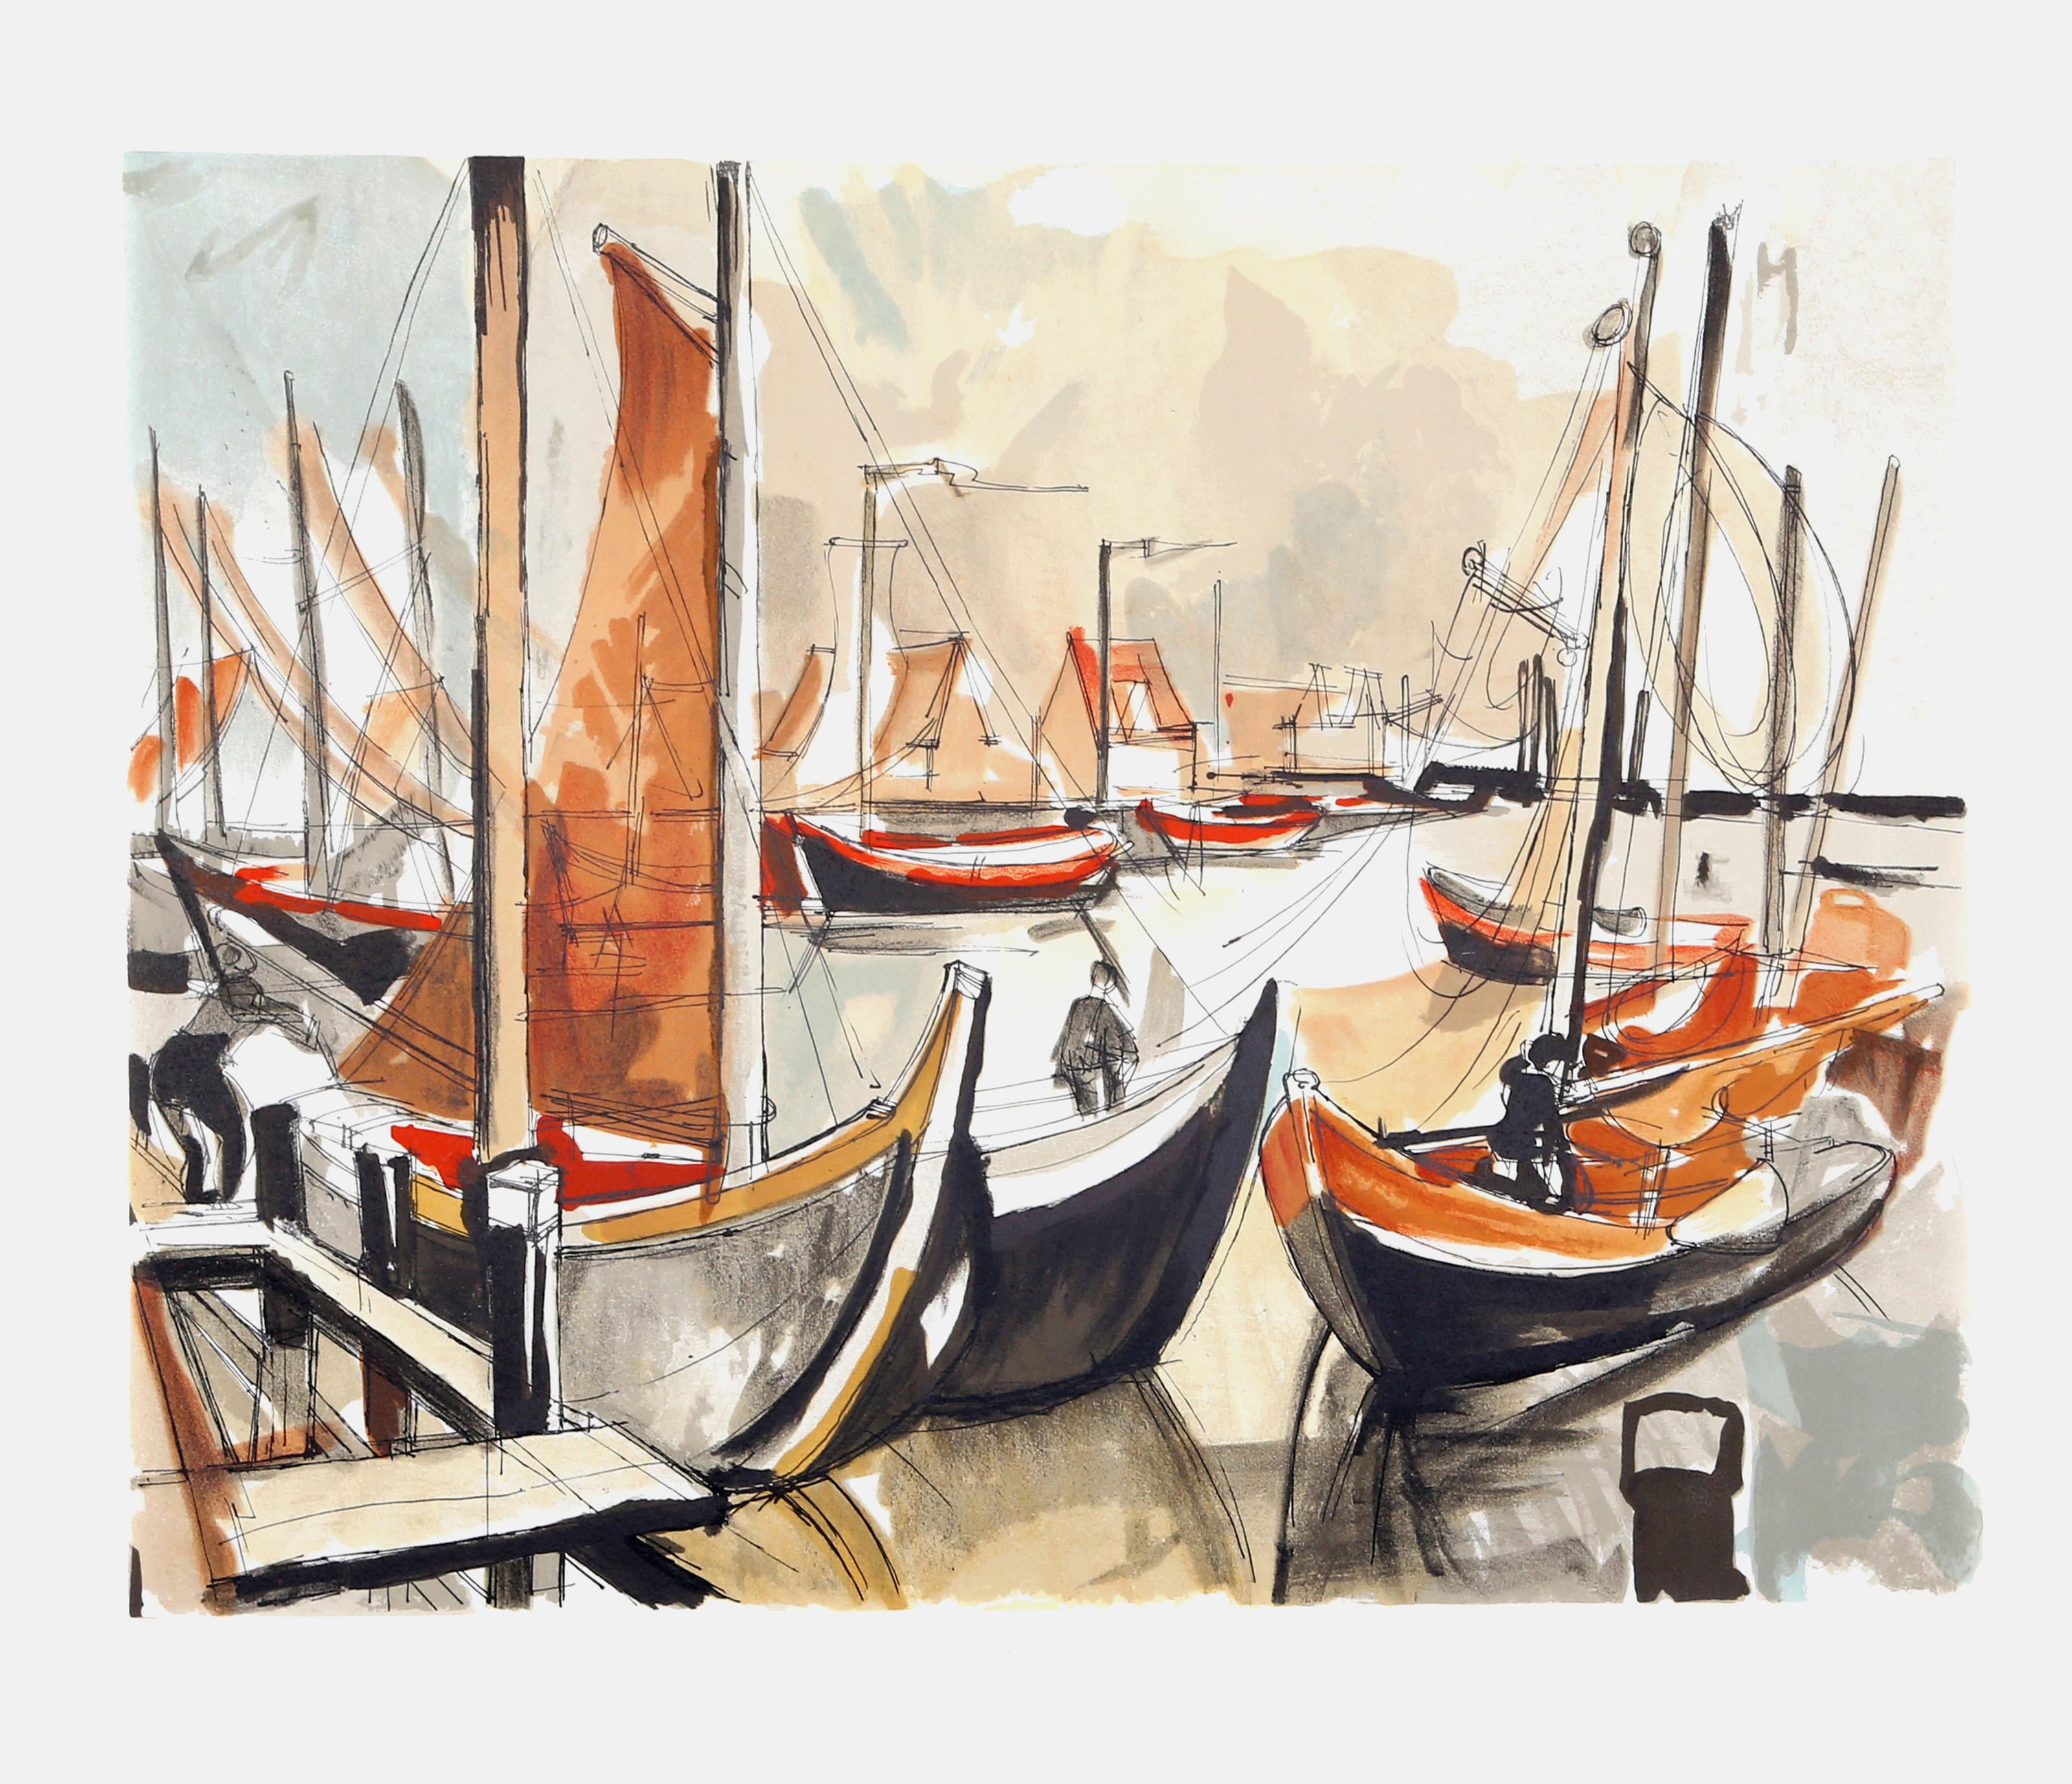 Laurent Marcel Salinas, Egyptian/French (1913 - 2010) -  Honfleur. Year: circa 1980, Medium: Lithograph, signed in pencil, Edition: EA, Size: 25.5  x 19.5 in. (64.77  x 49.53 cm) 